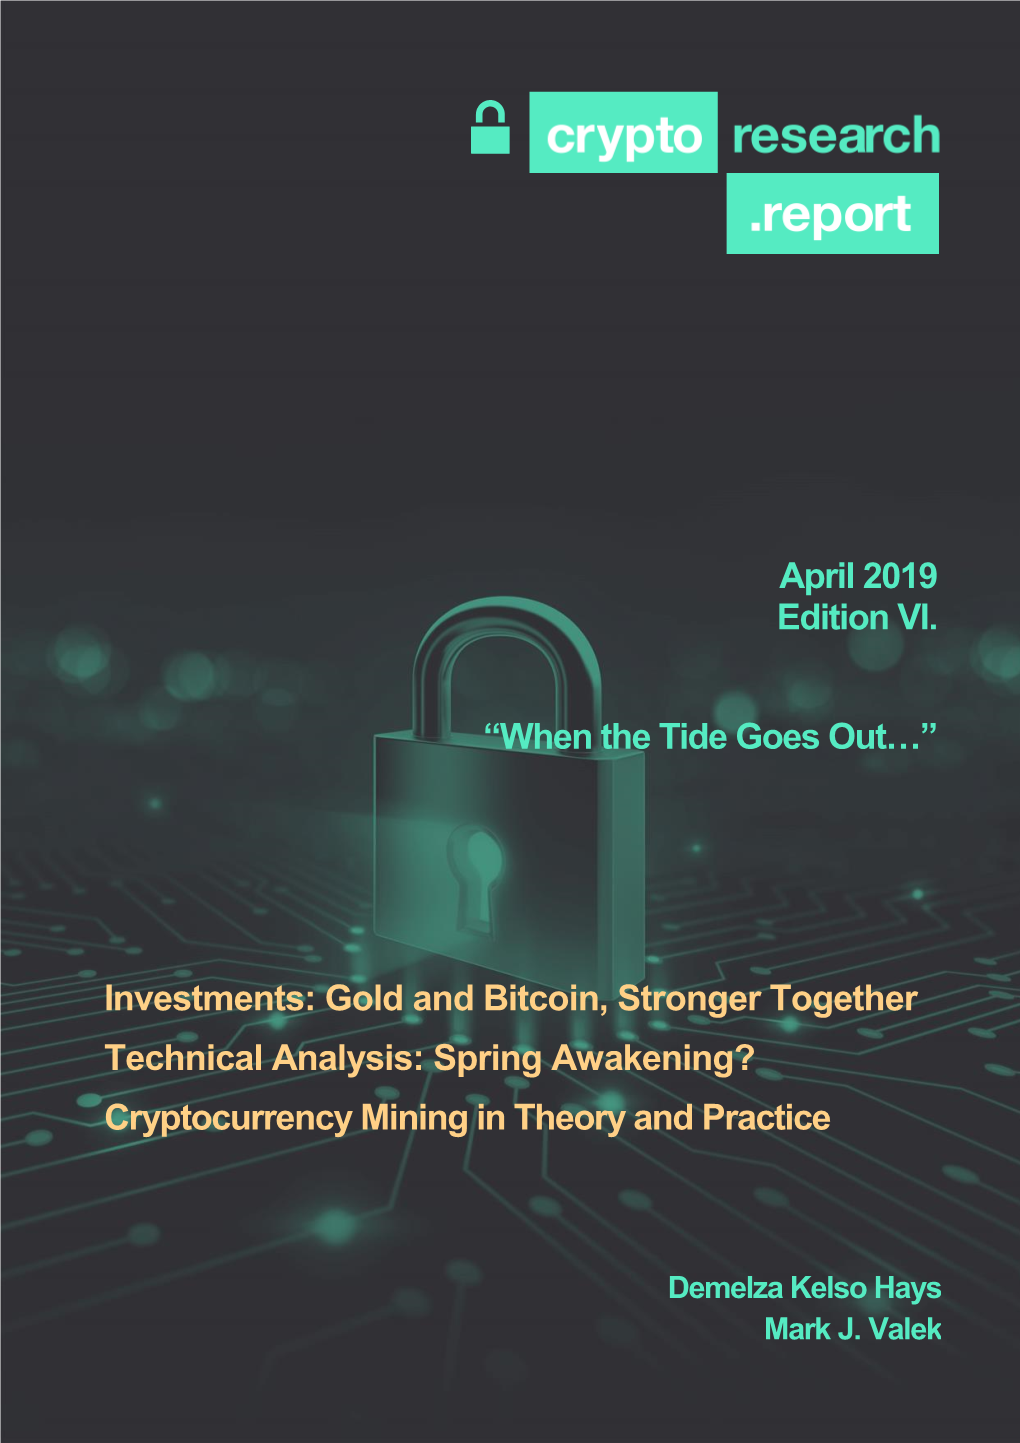 Crypto Research Report, April 2019